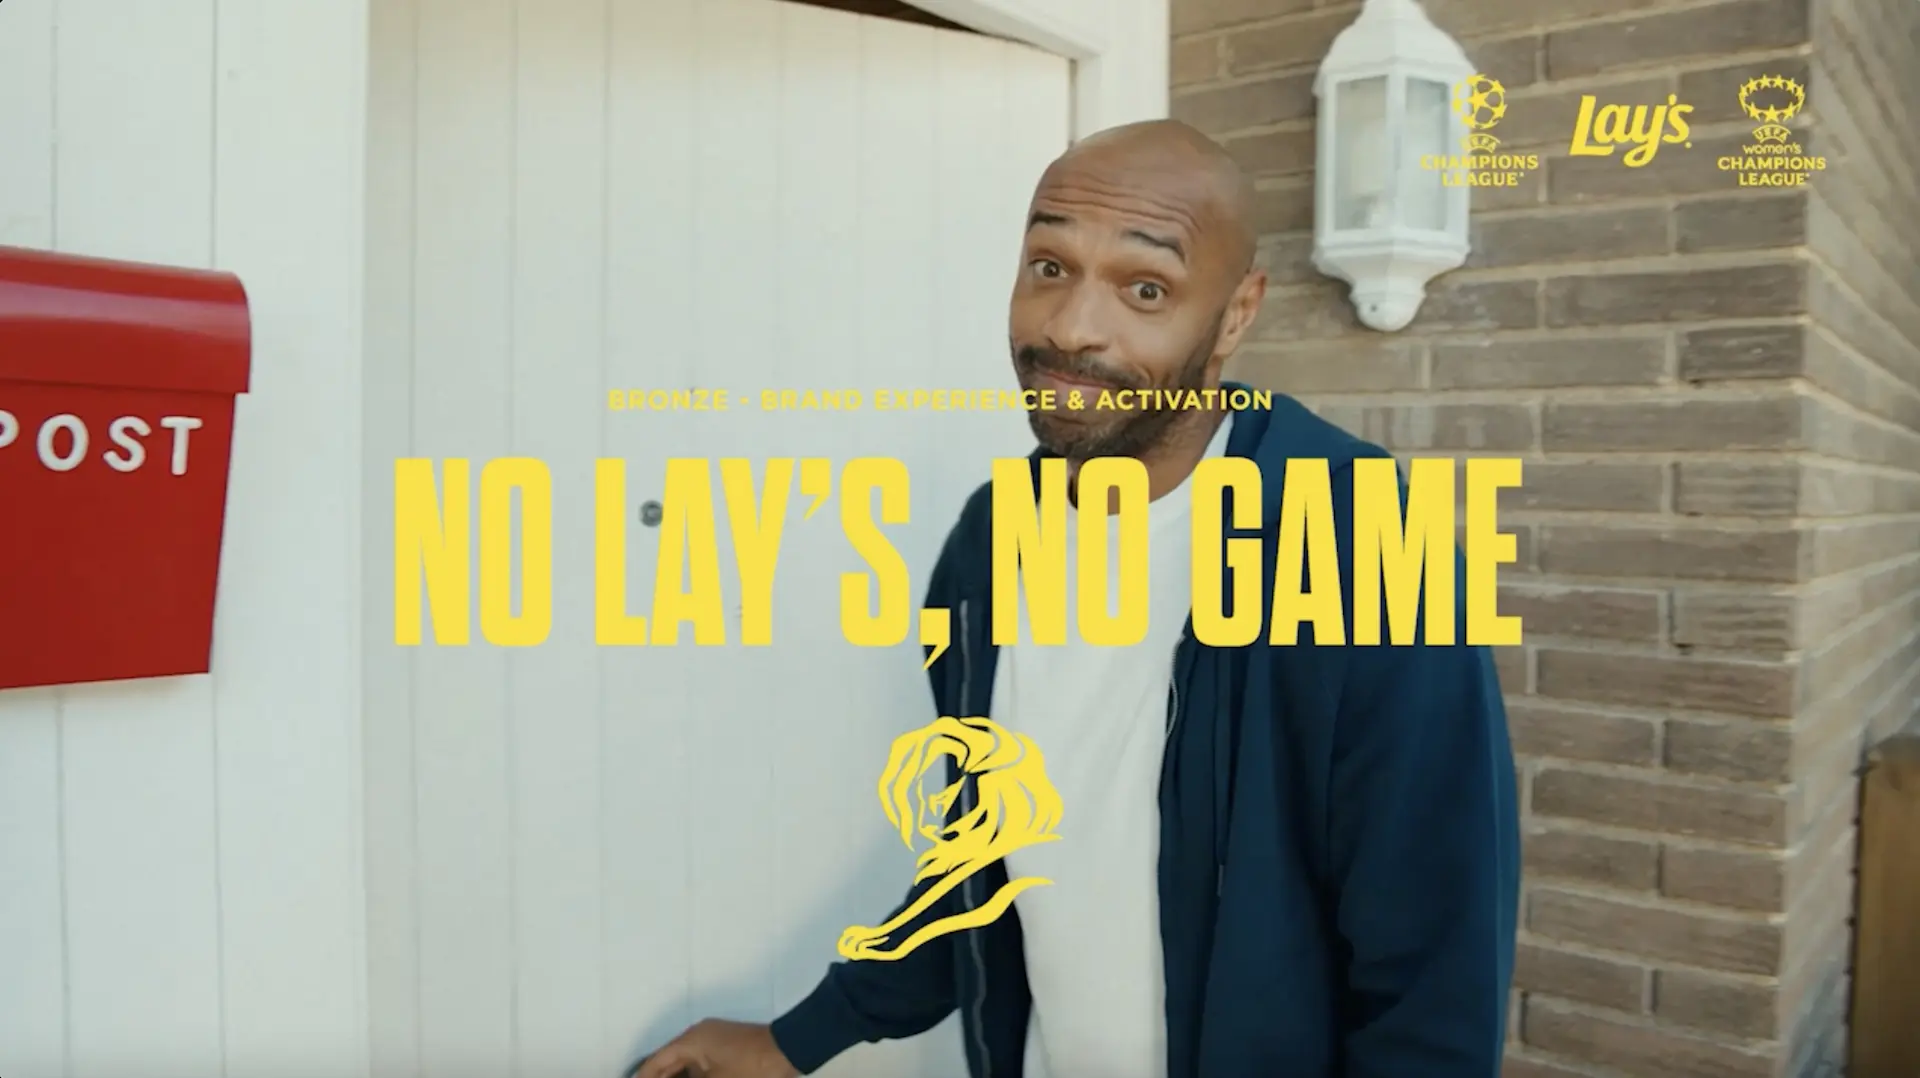 Andrew Lane’s “Thierry Visits” Spot for Lay’s by Slap Global wins Cannes Bronze Lion